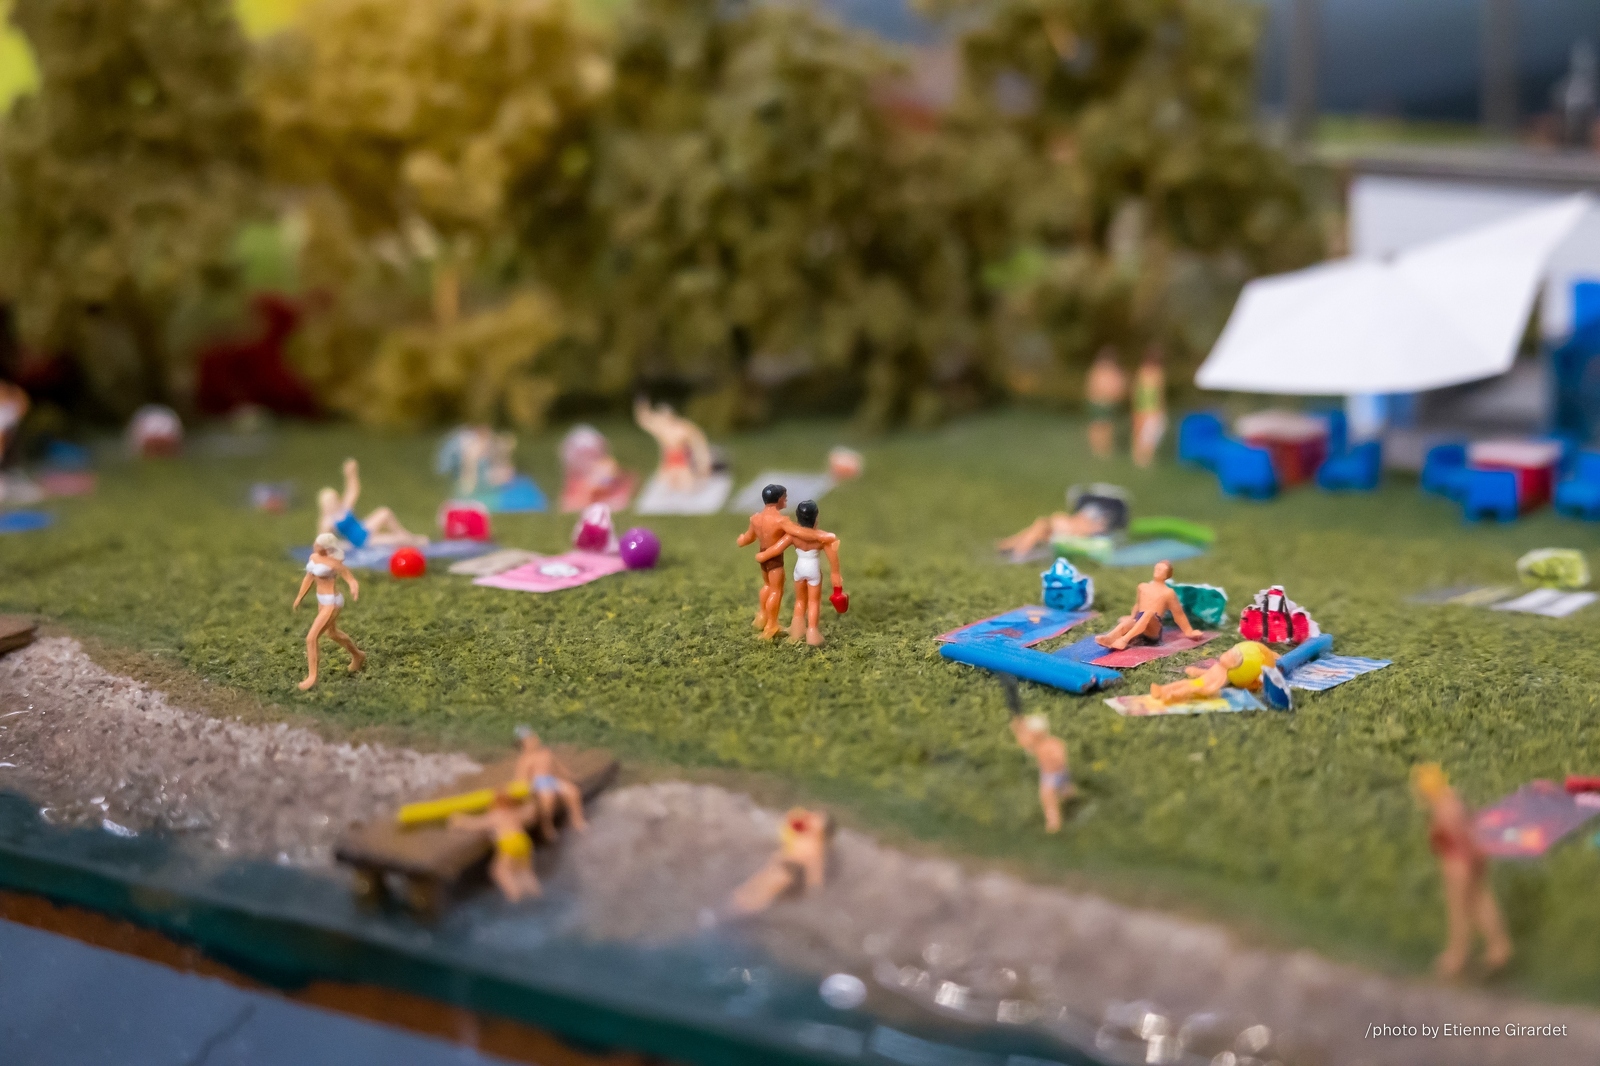 201910_15_RXX08085-tiny-people-outdoor-pool-by-E-Girardet.jpg